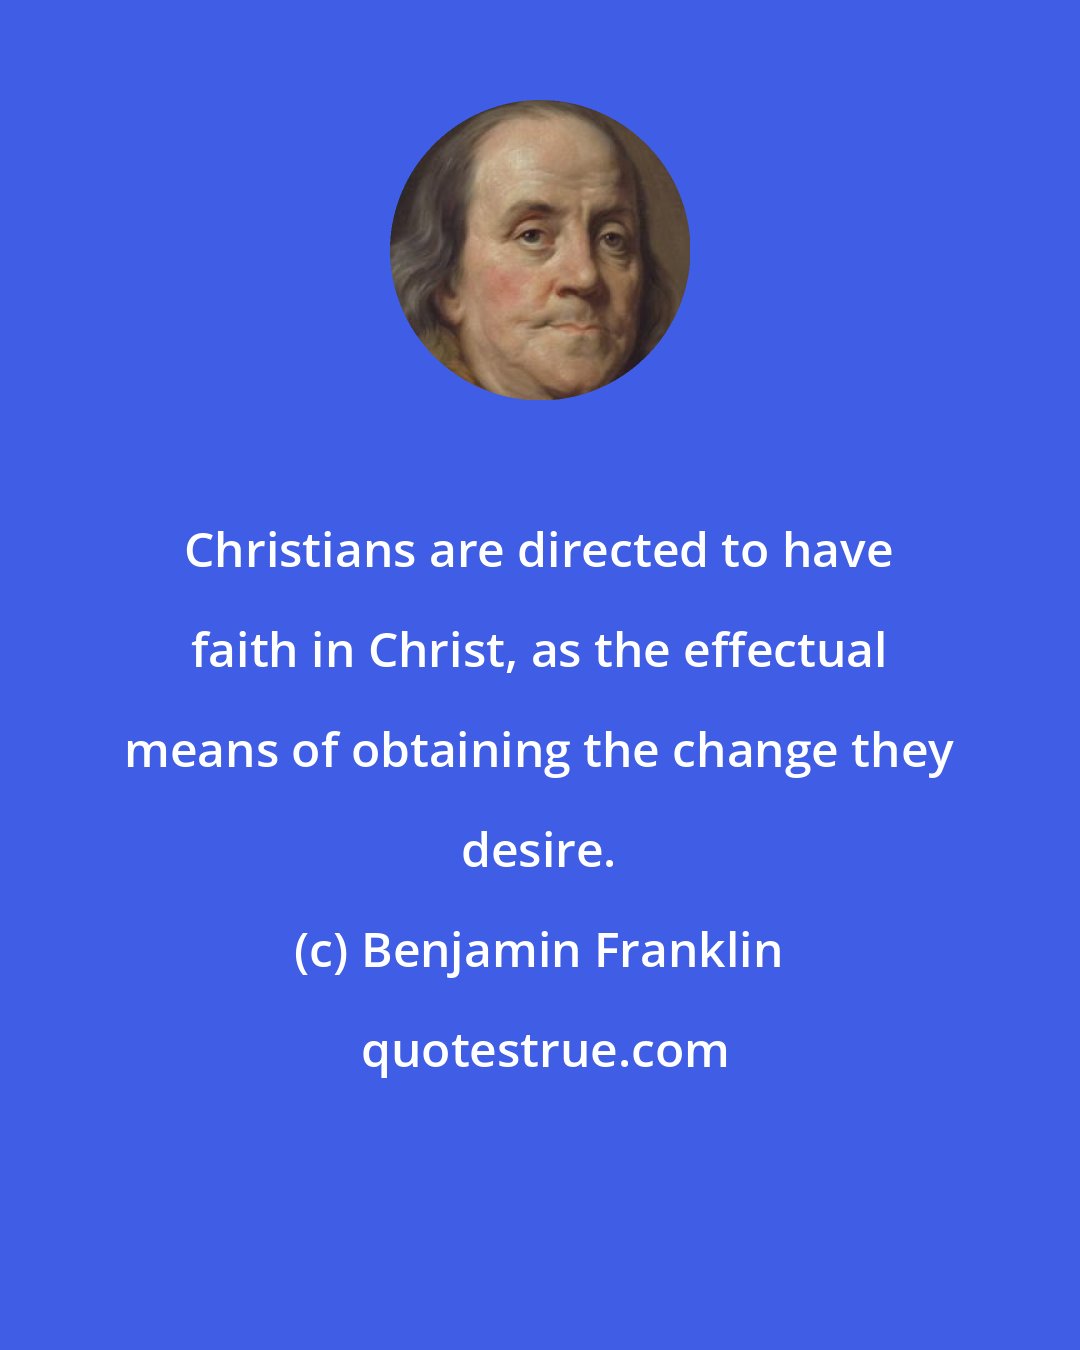 Benjamin Franklin: Christians are directed to have faith in Christ, as the effectual means of obtaining the change they desire.